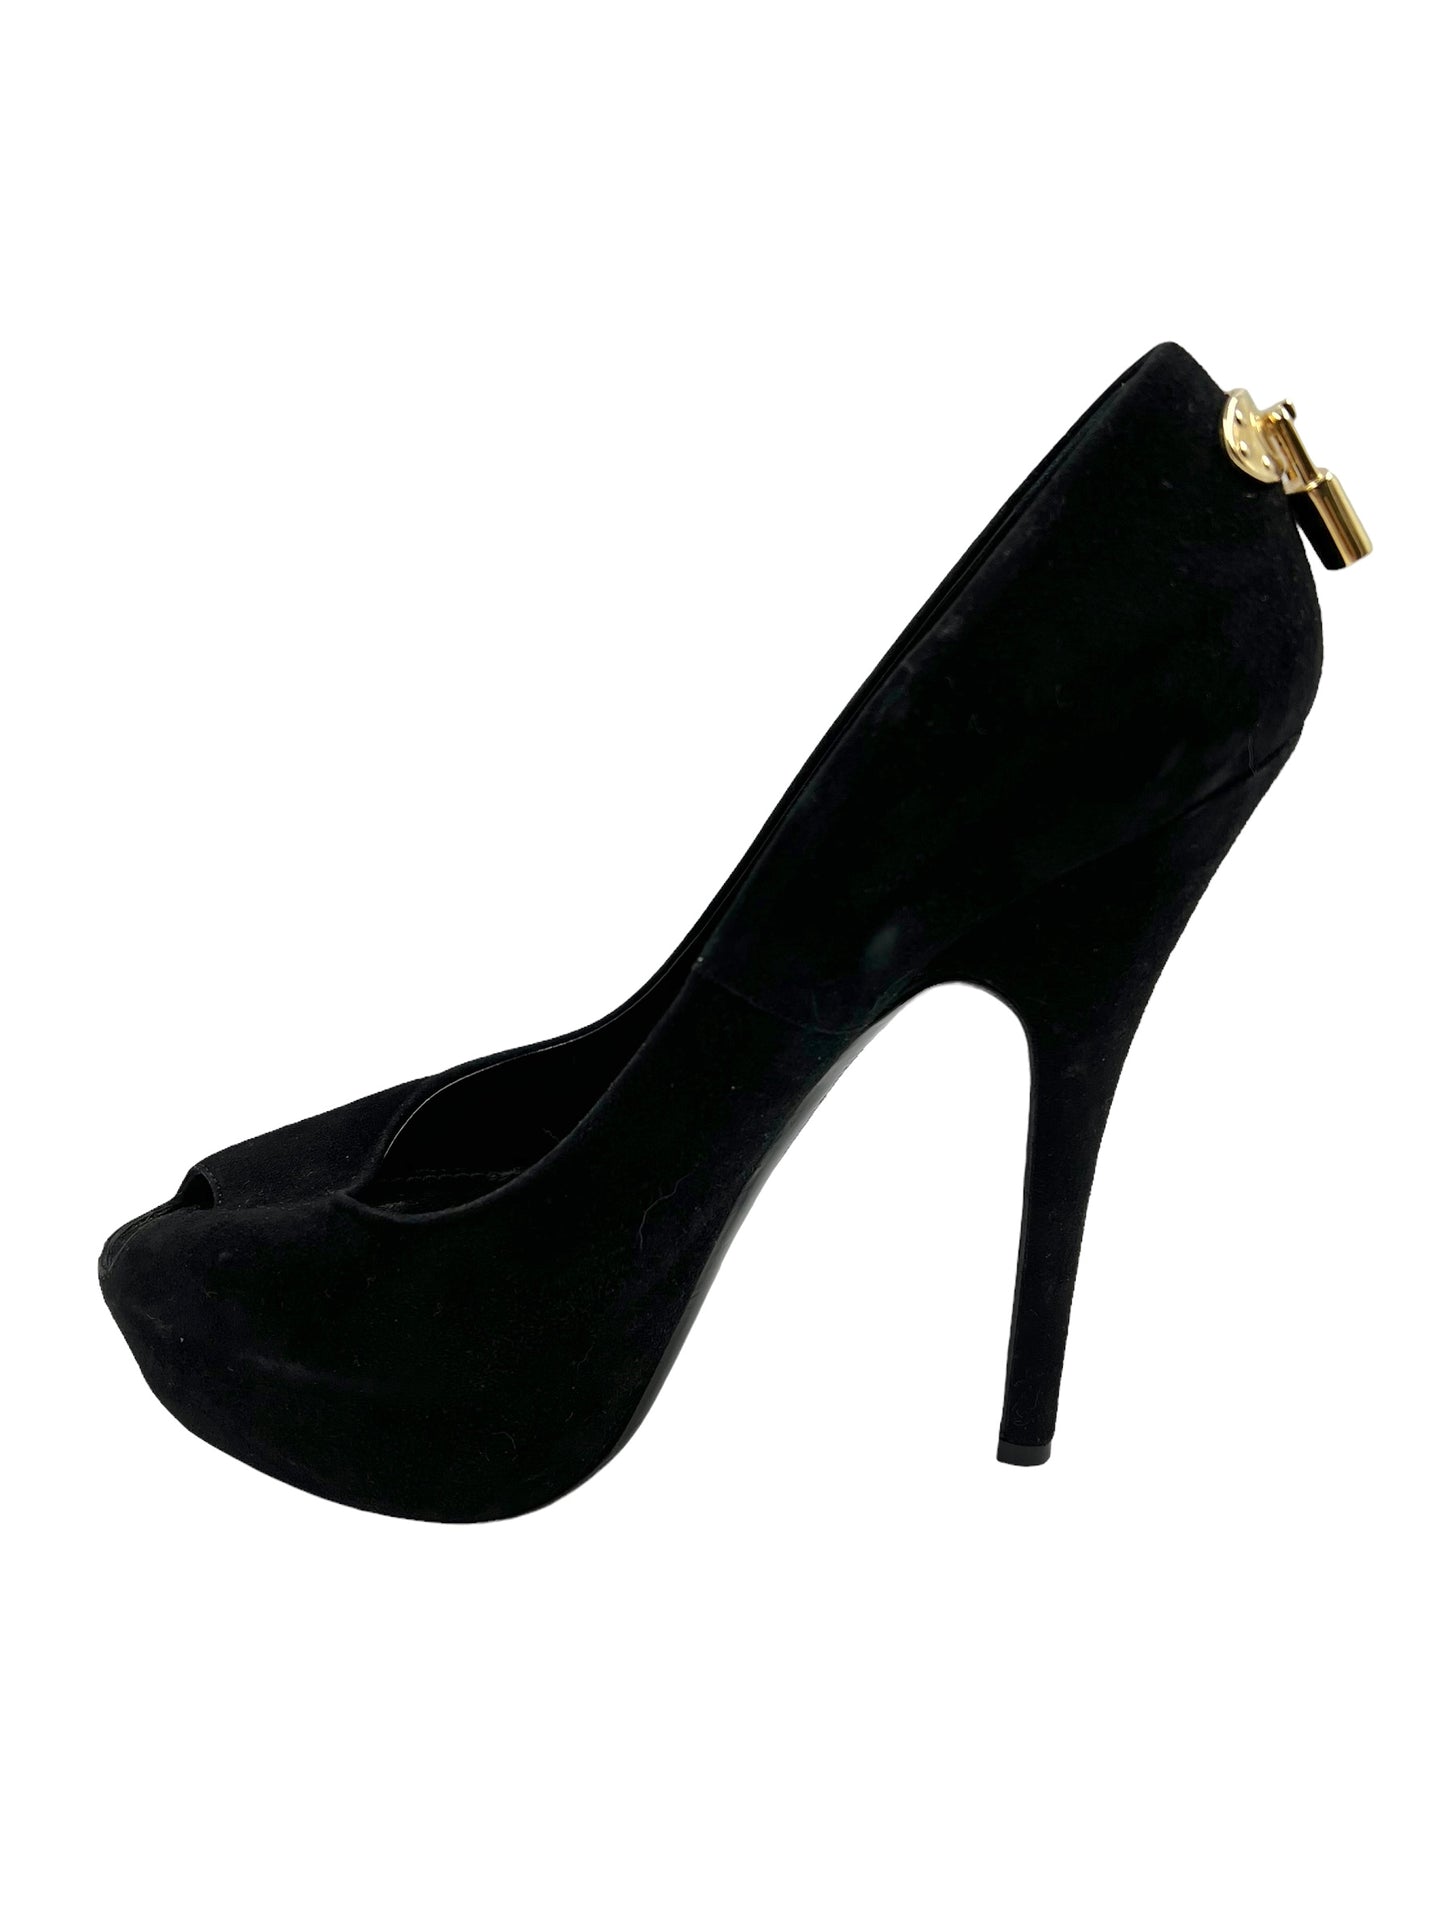 Louis Vuitton Black Suede 'Oh Really!' Size 39.5 Lock Heels